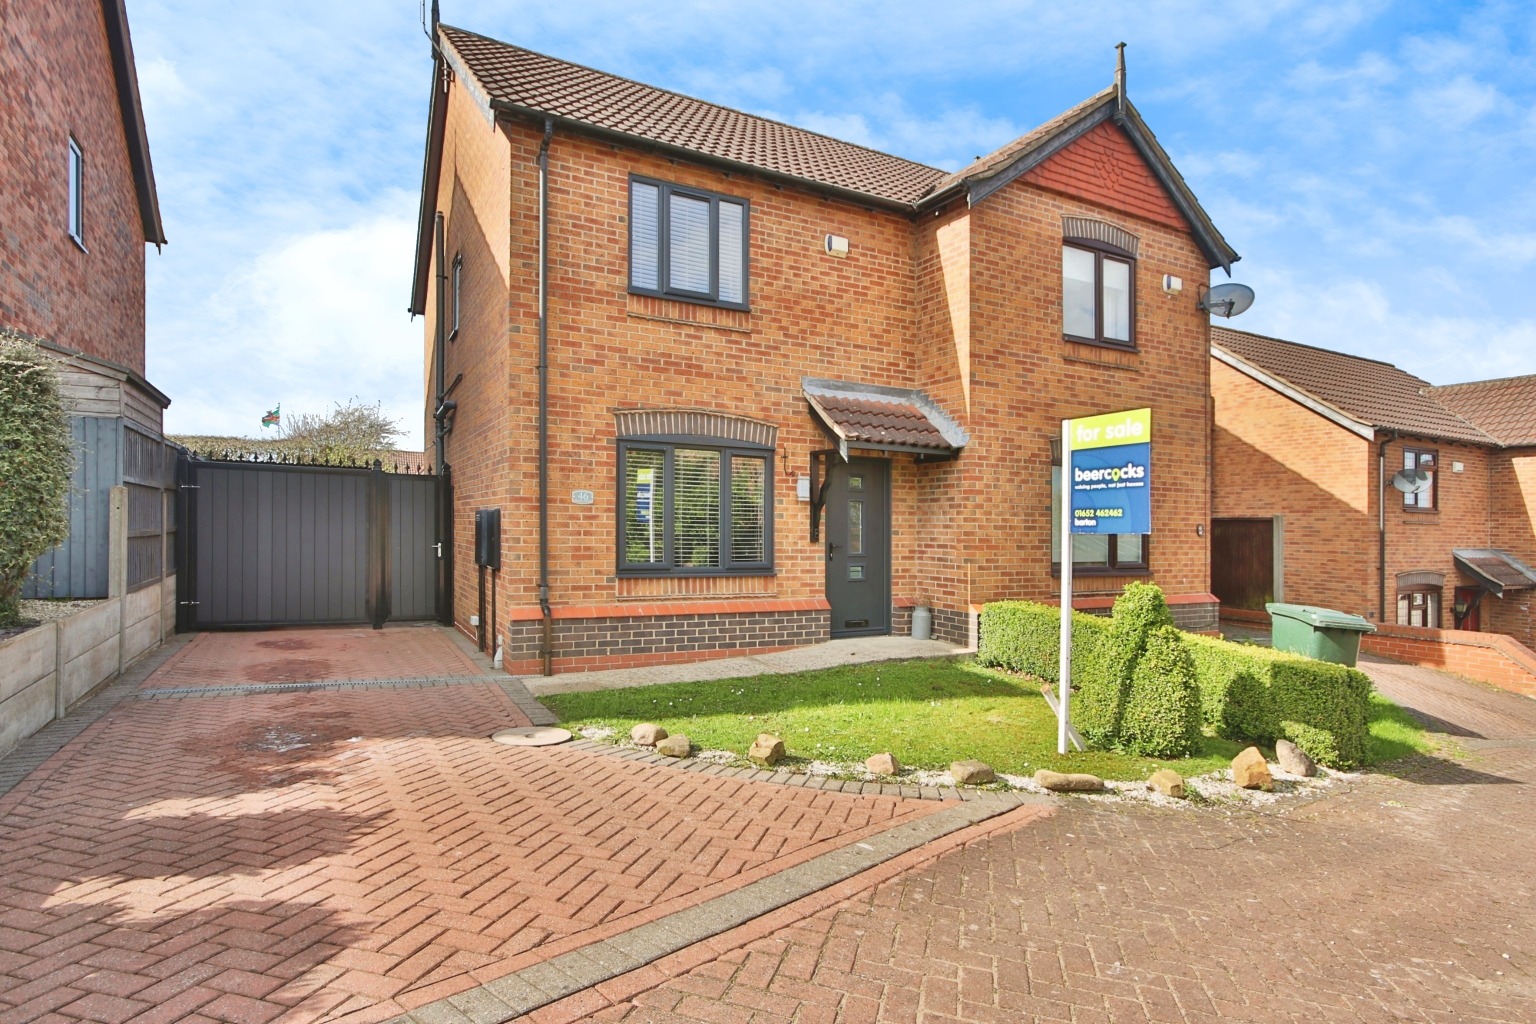 2 bed semi-detached house for sale in Harvest Avenue, Barton upon Humber - Property Image 1